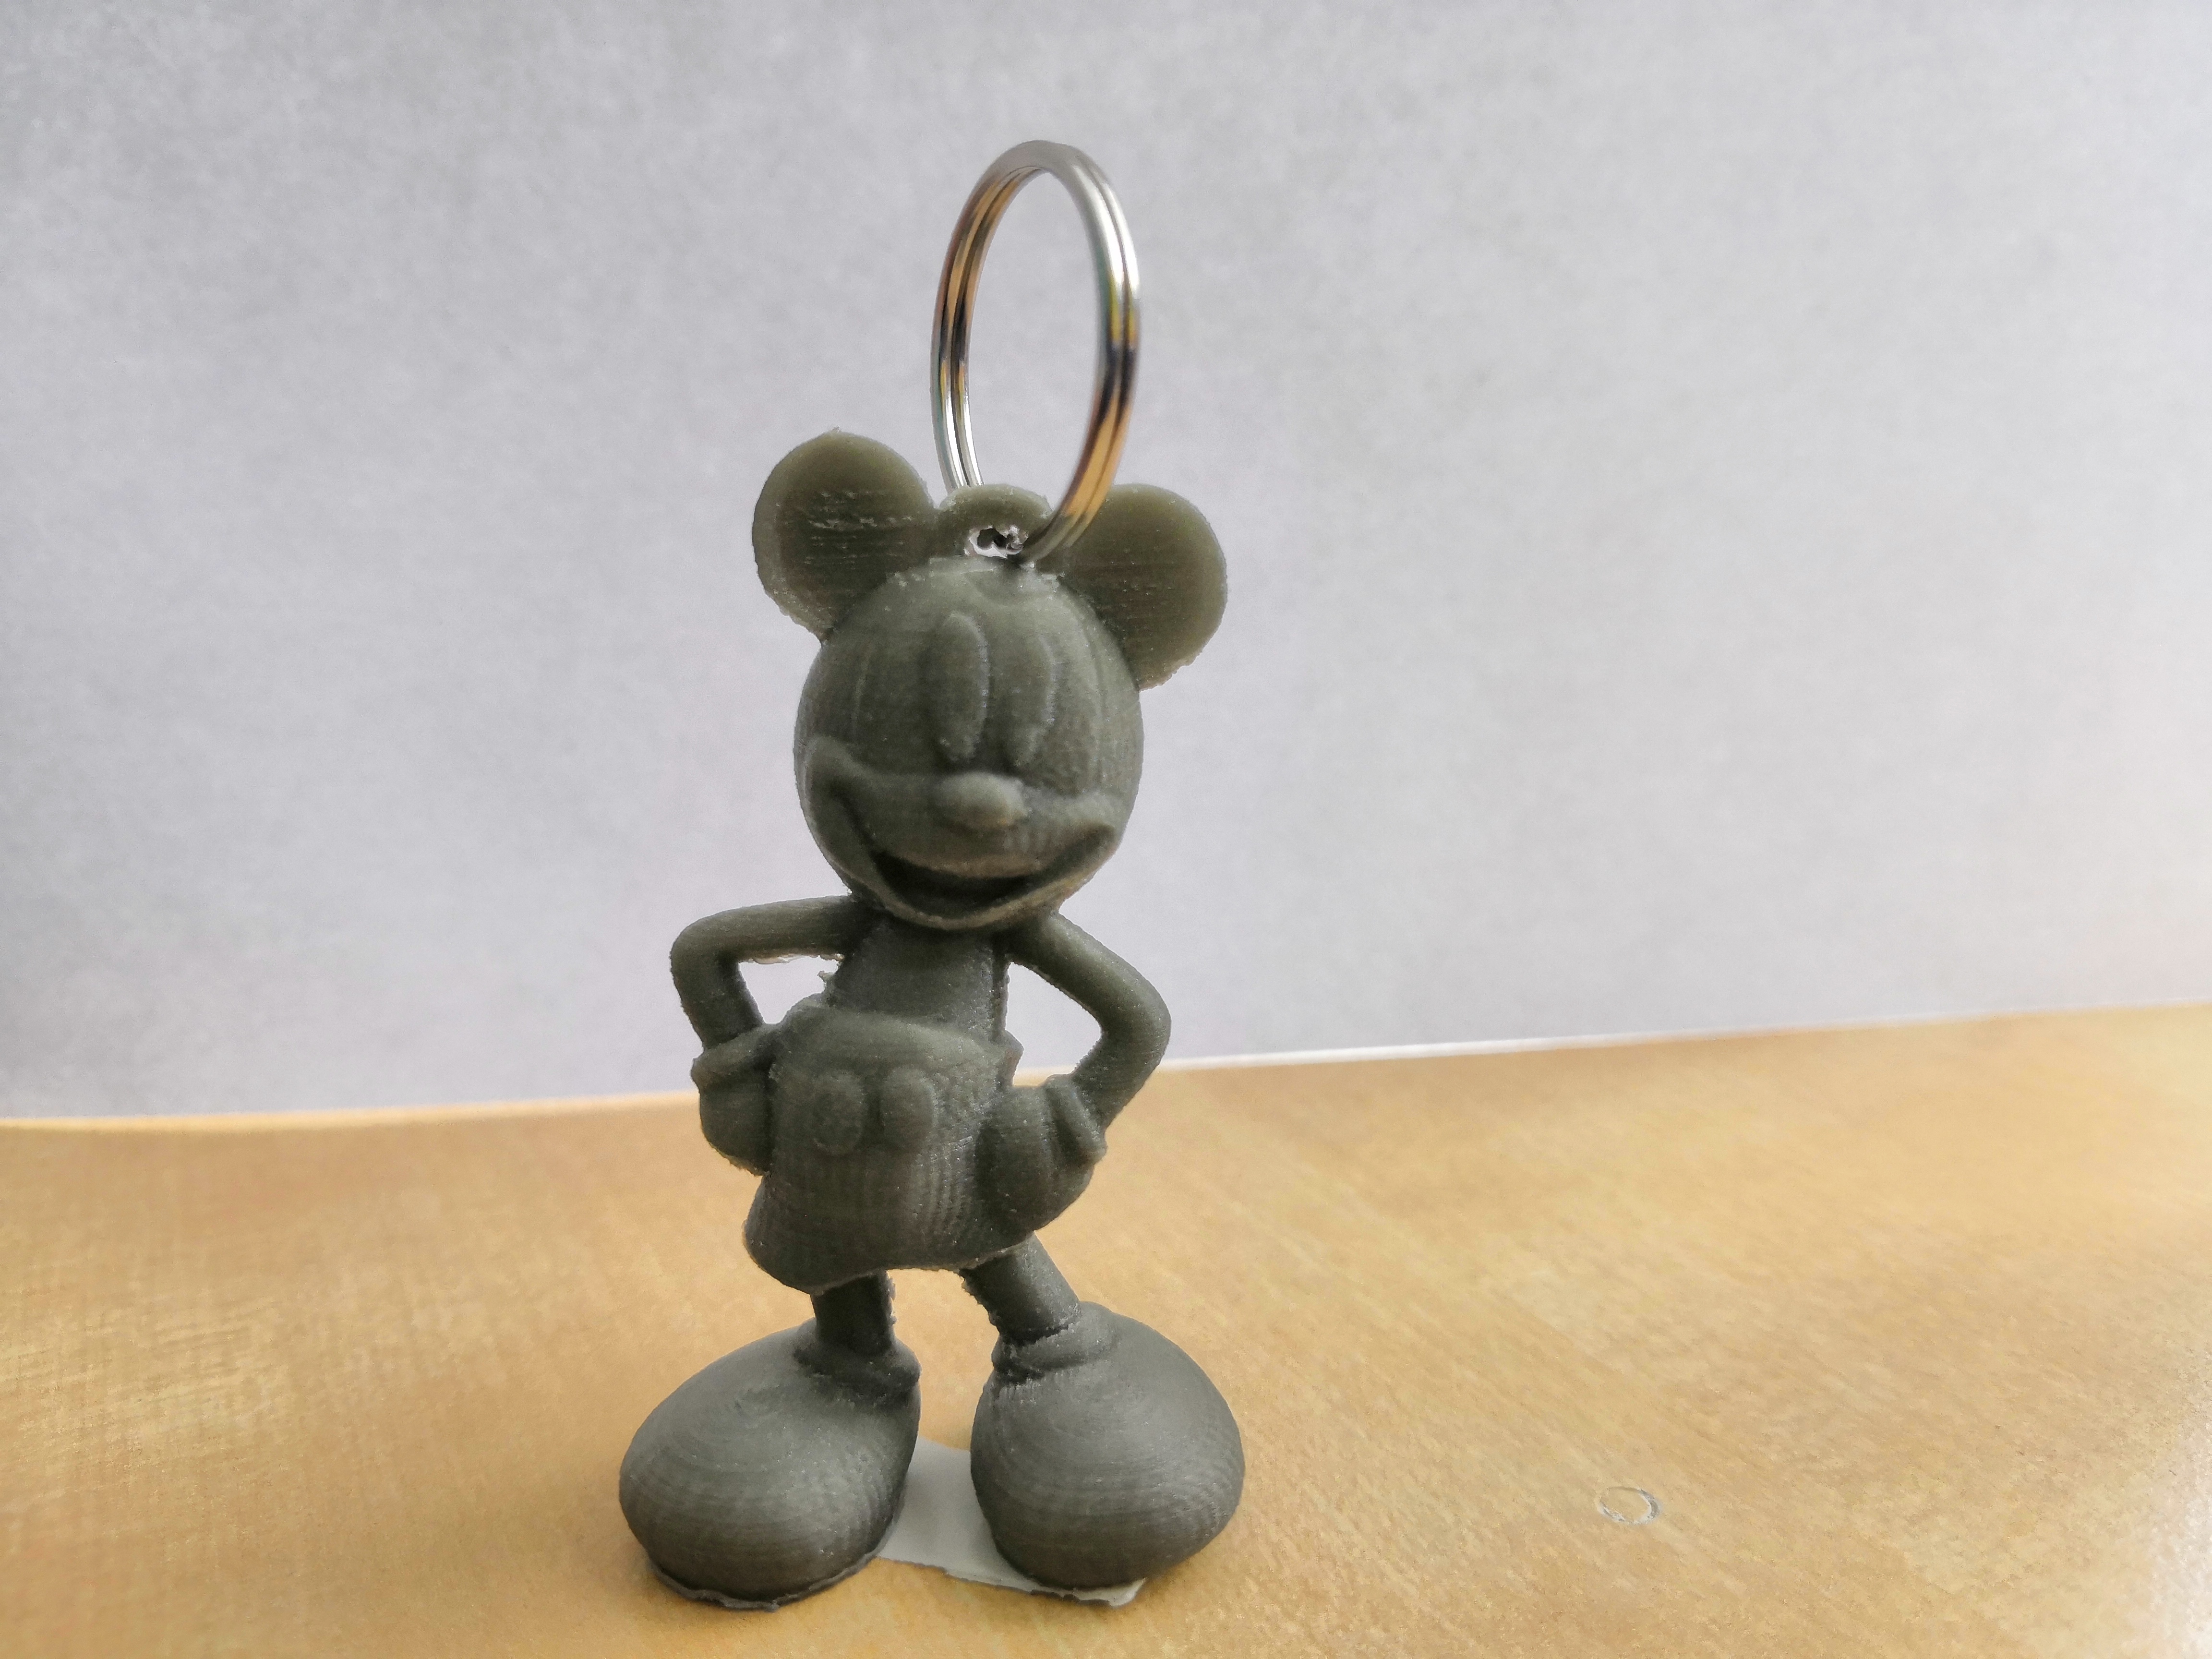 Mickey mouse for keys